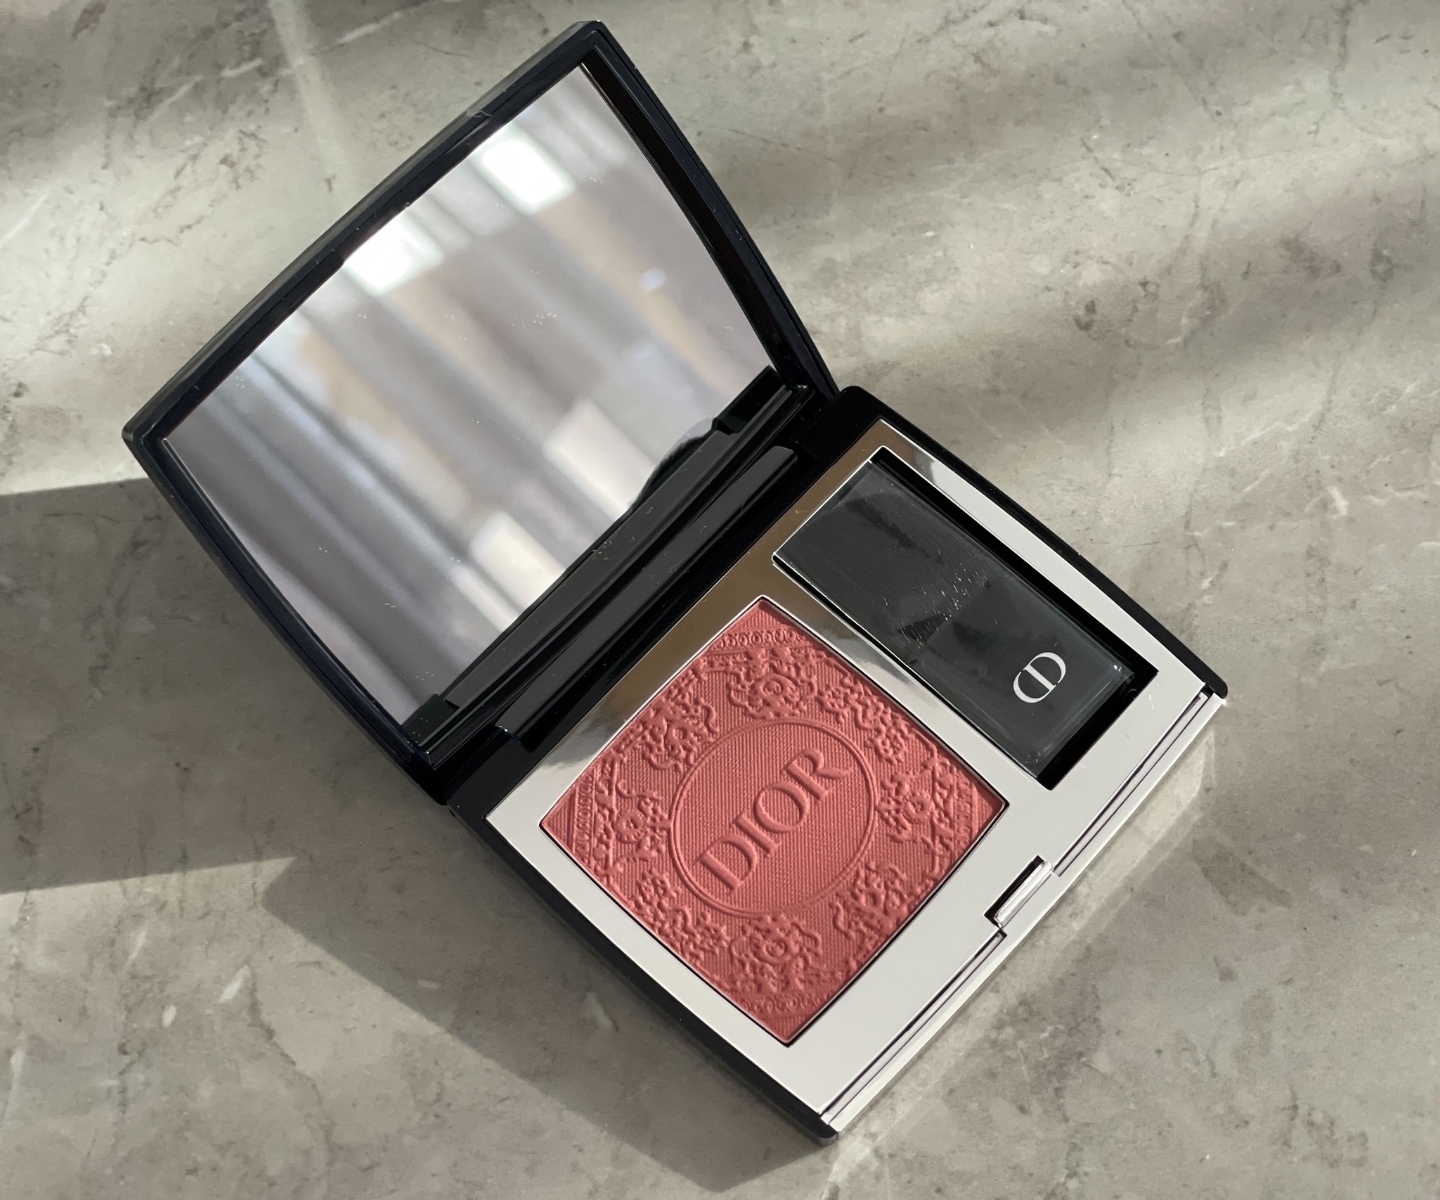 DIOR Rouge Blush Satin Limited Edition